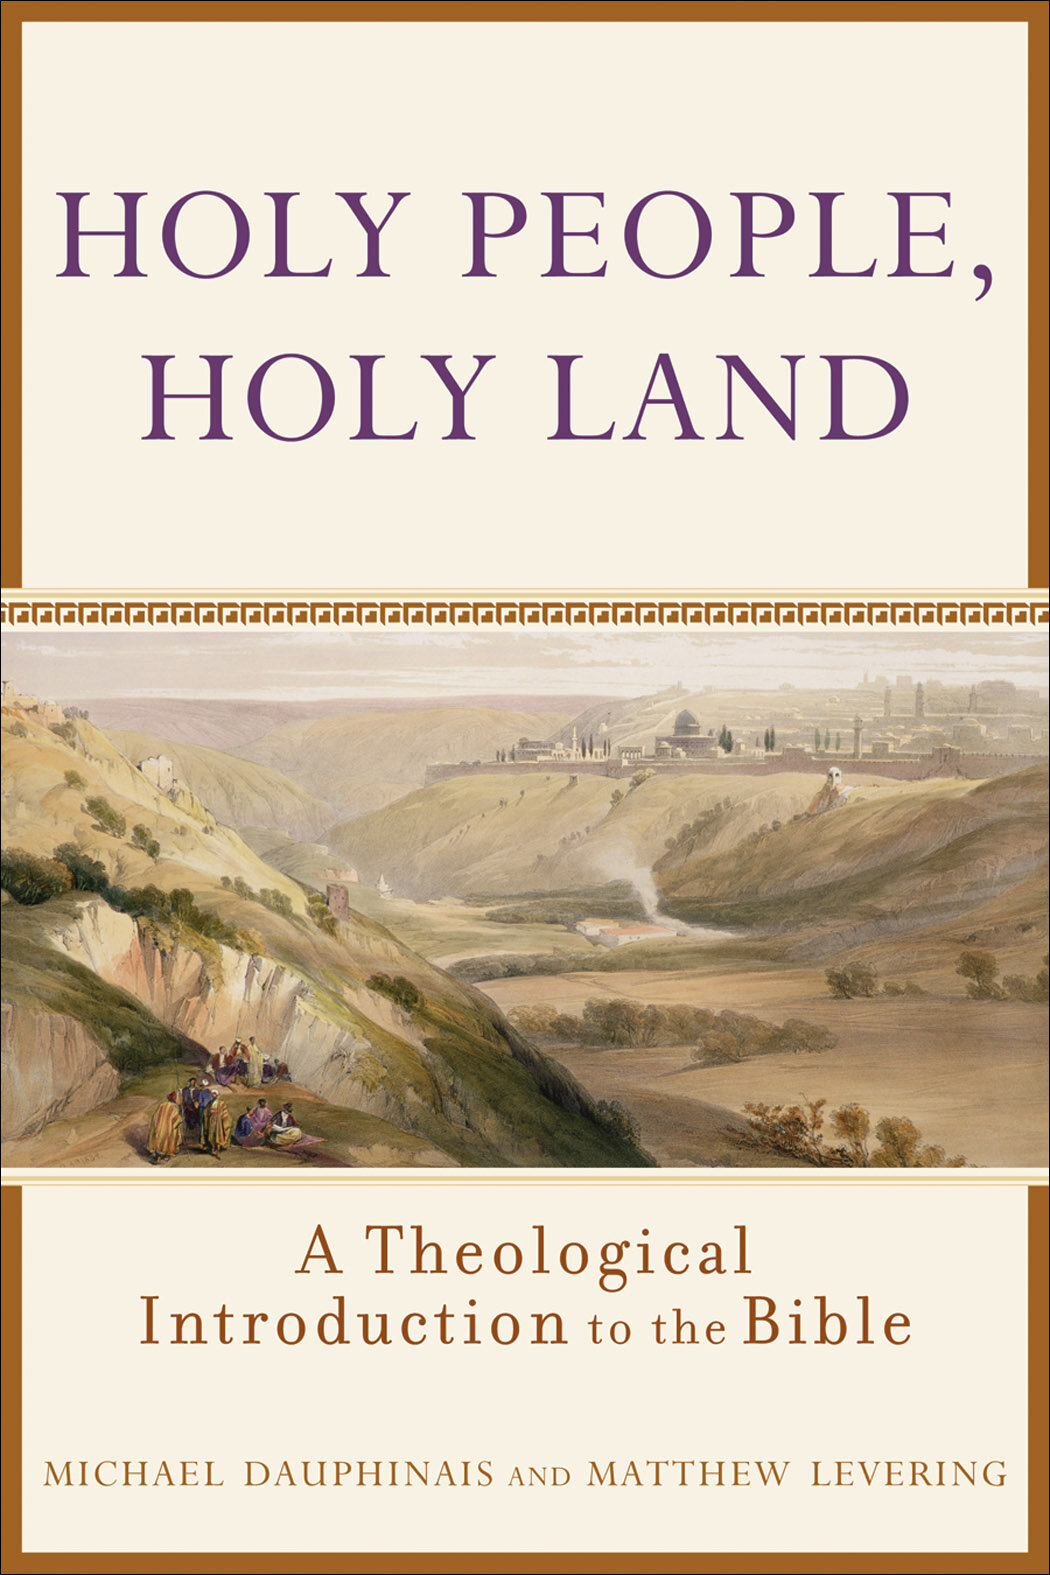 Holy People, Holy Land: A Theological Introduction to the Bible